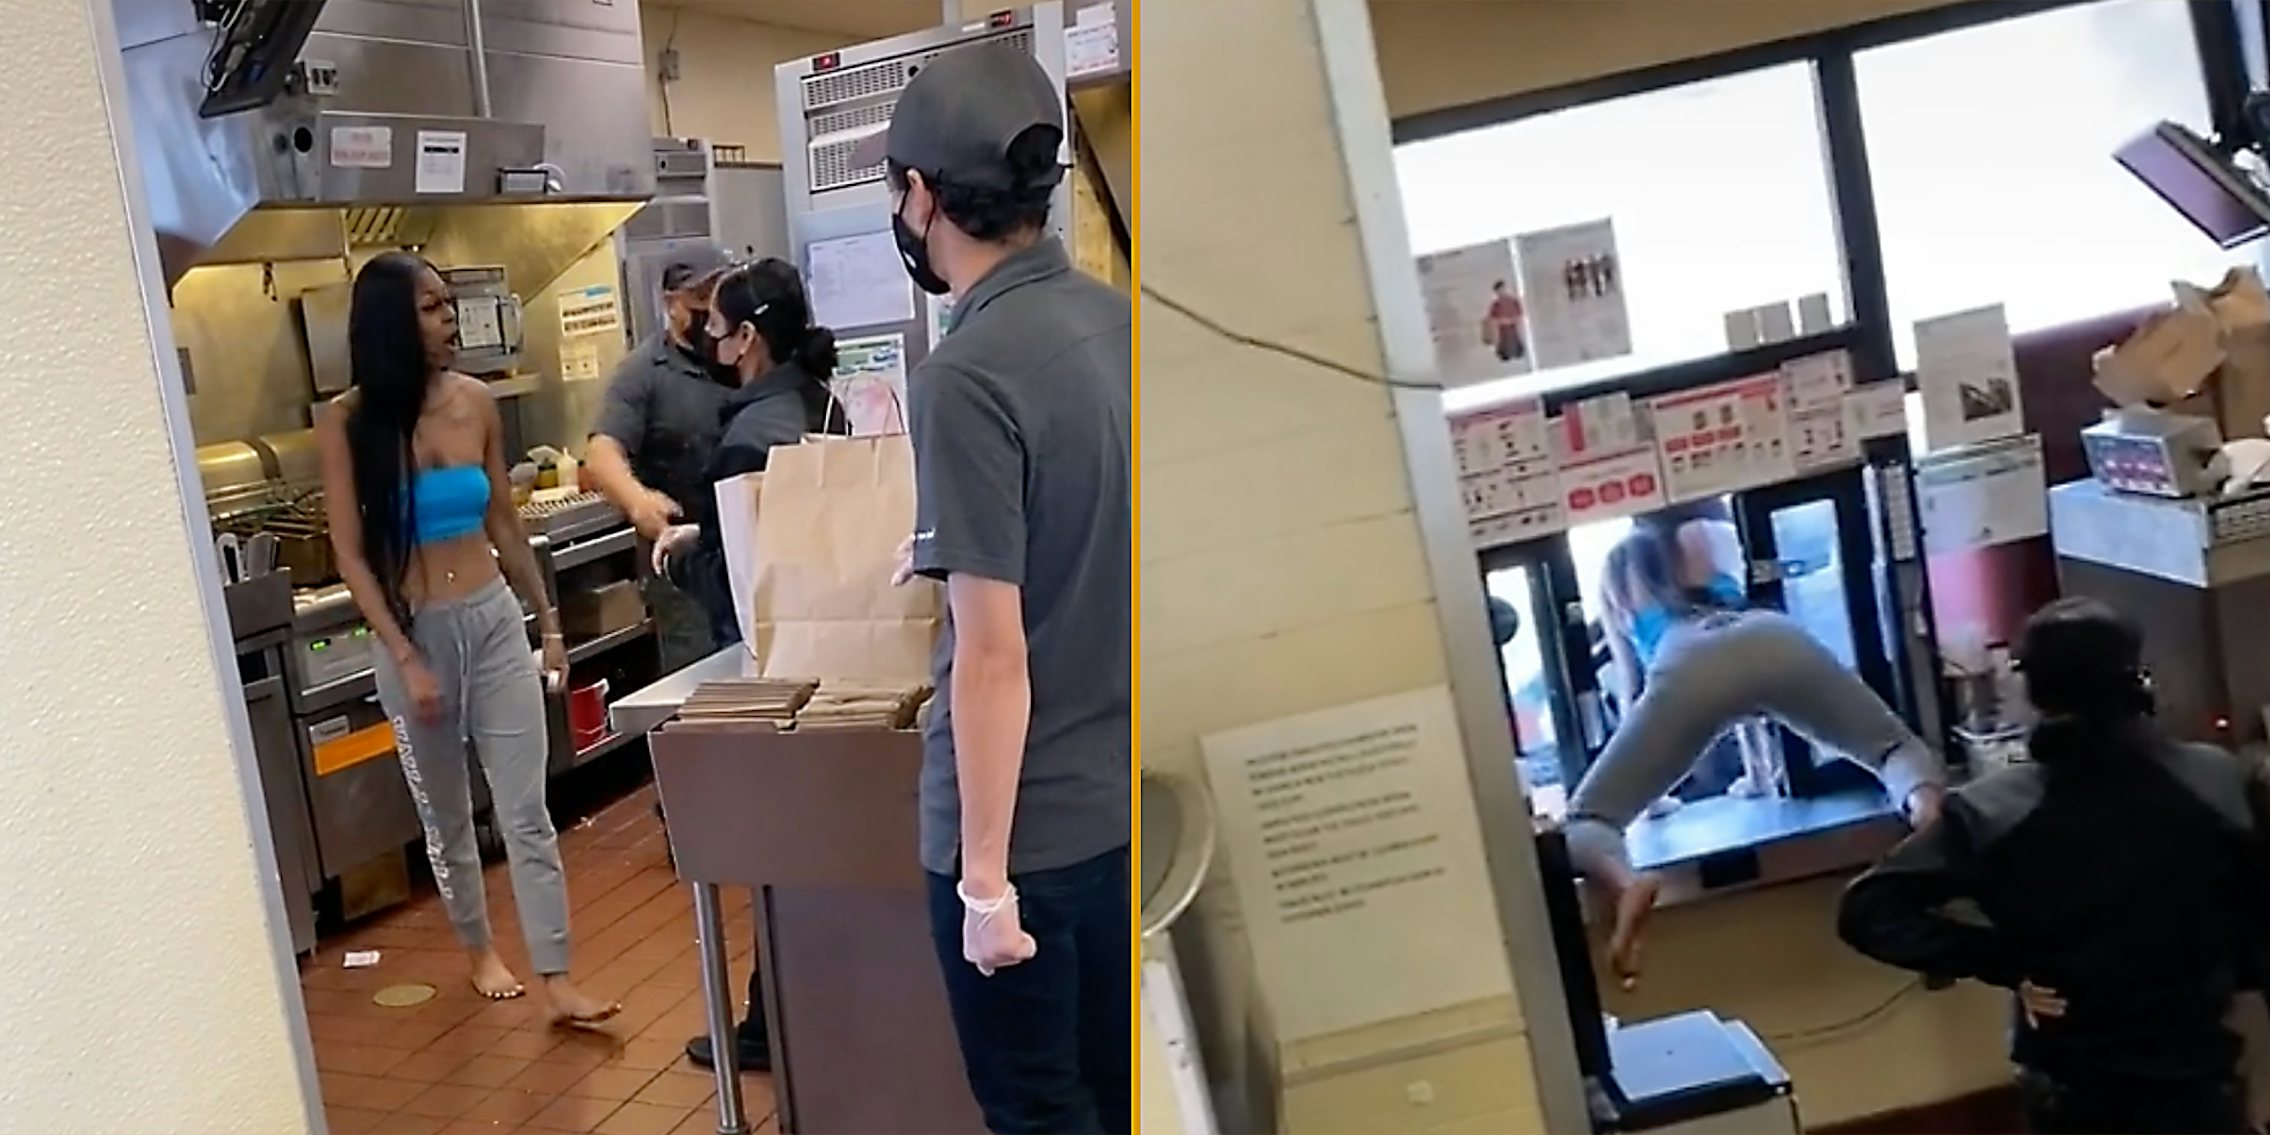 Jack in the Box video of cup size experiment goes viral